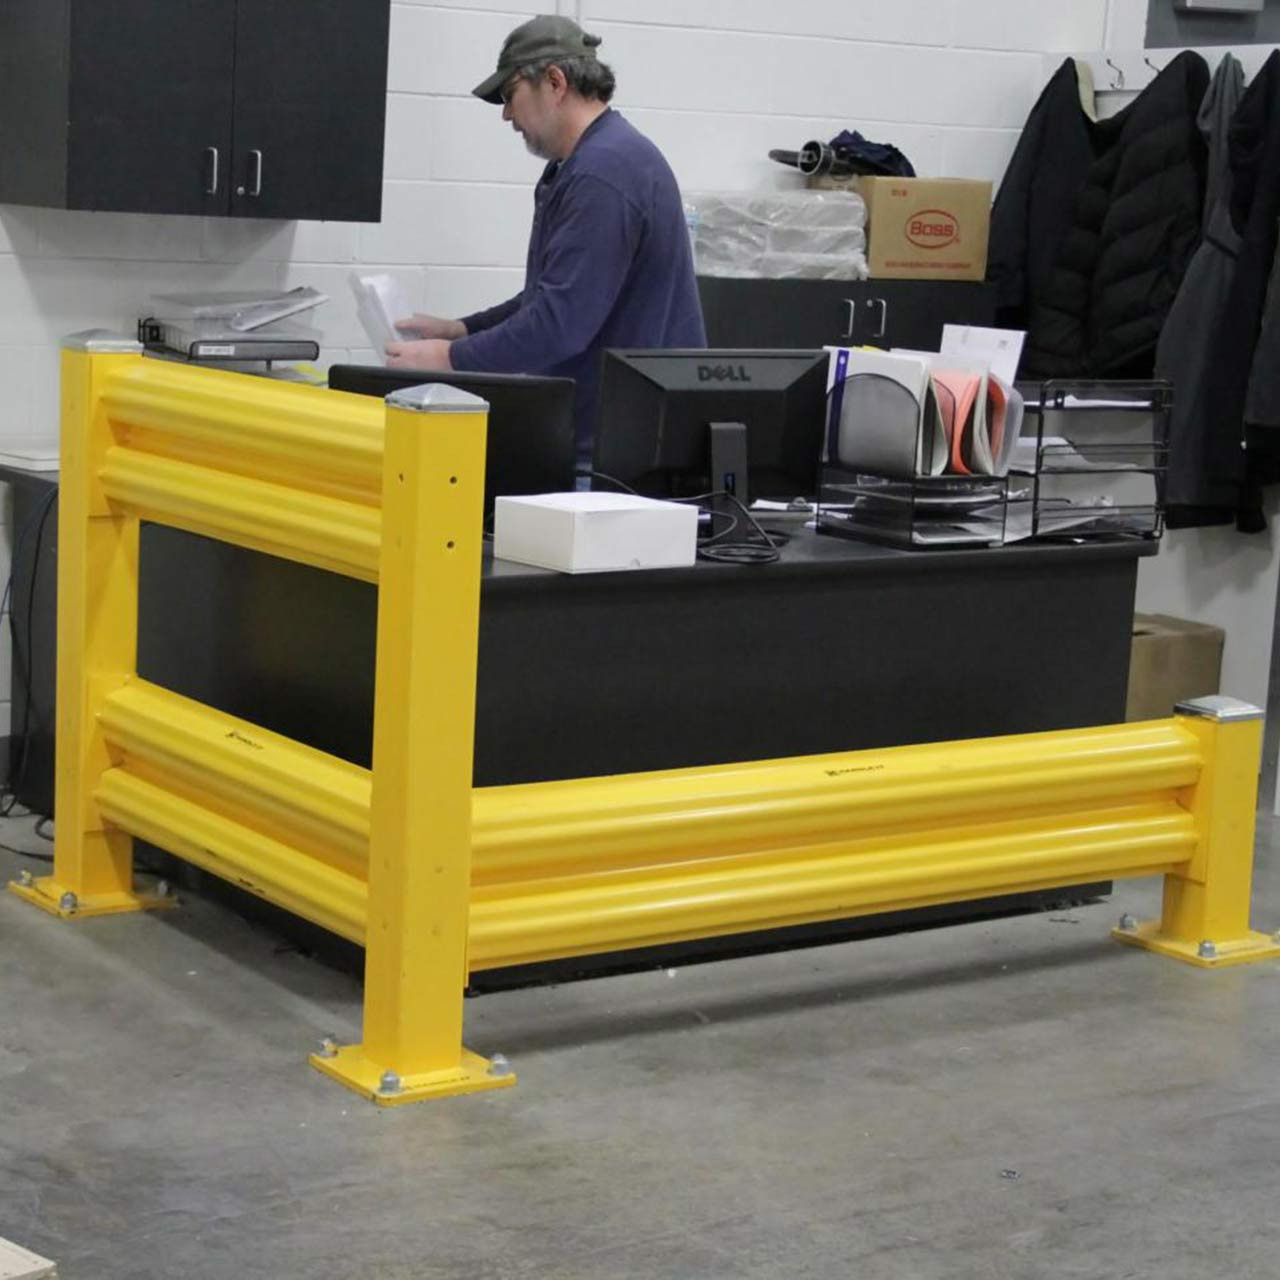 One or two rails can be mounted on Handle It columns